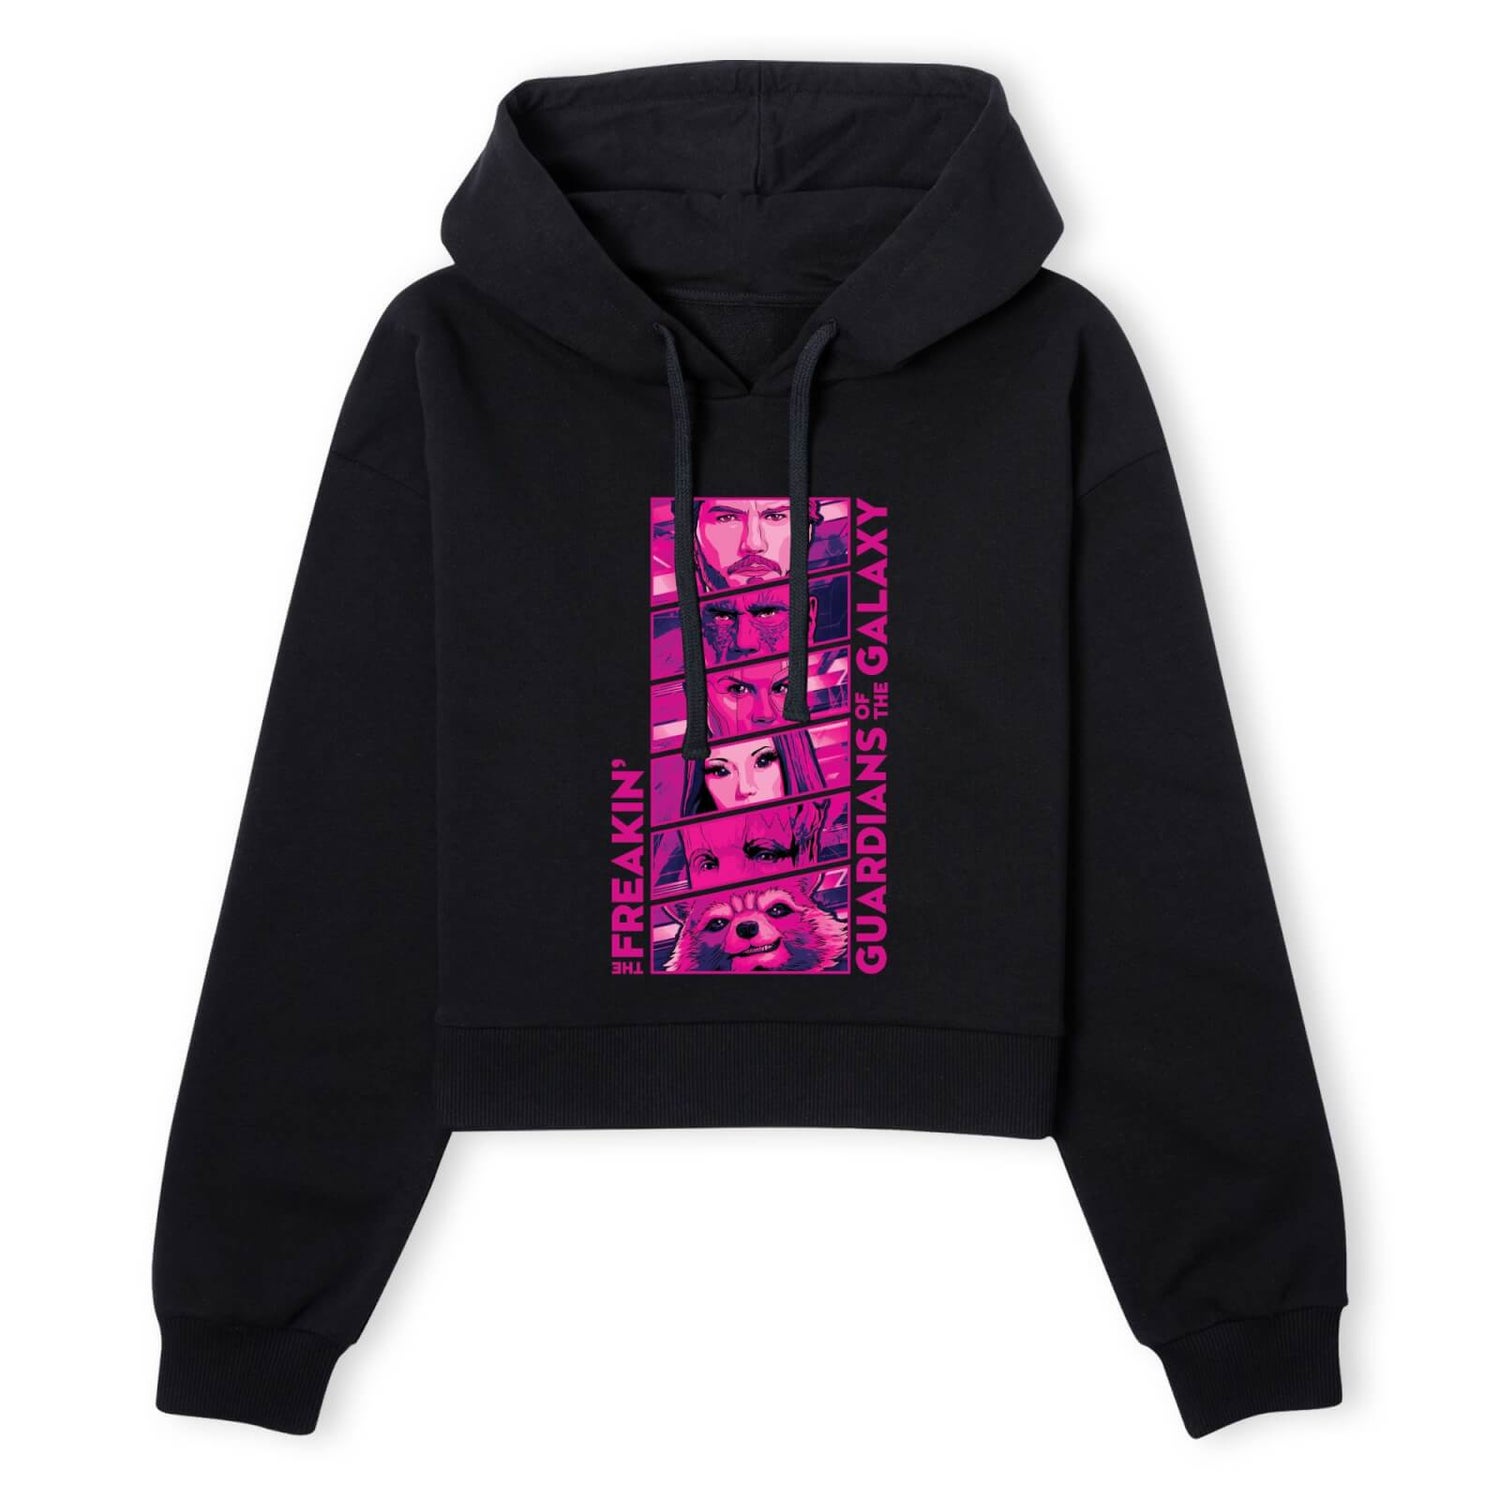 Guardians of the Galaxy Faces Women's Cropped Hoodie - Black